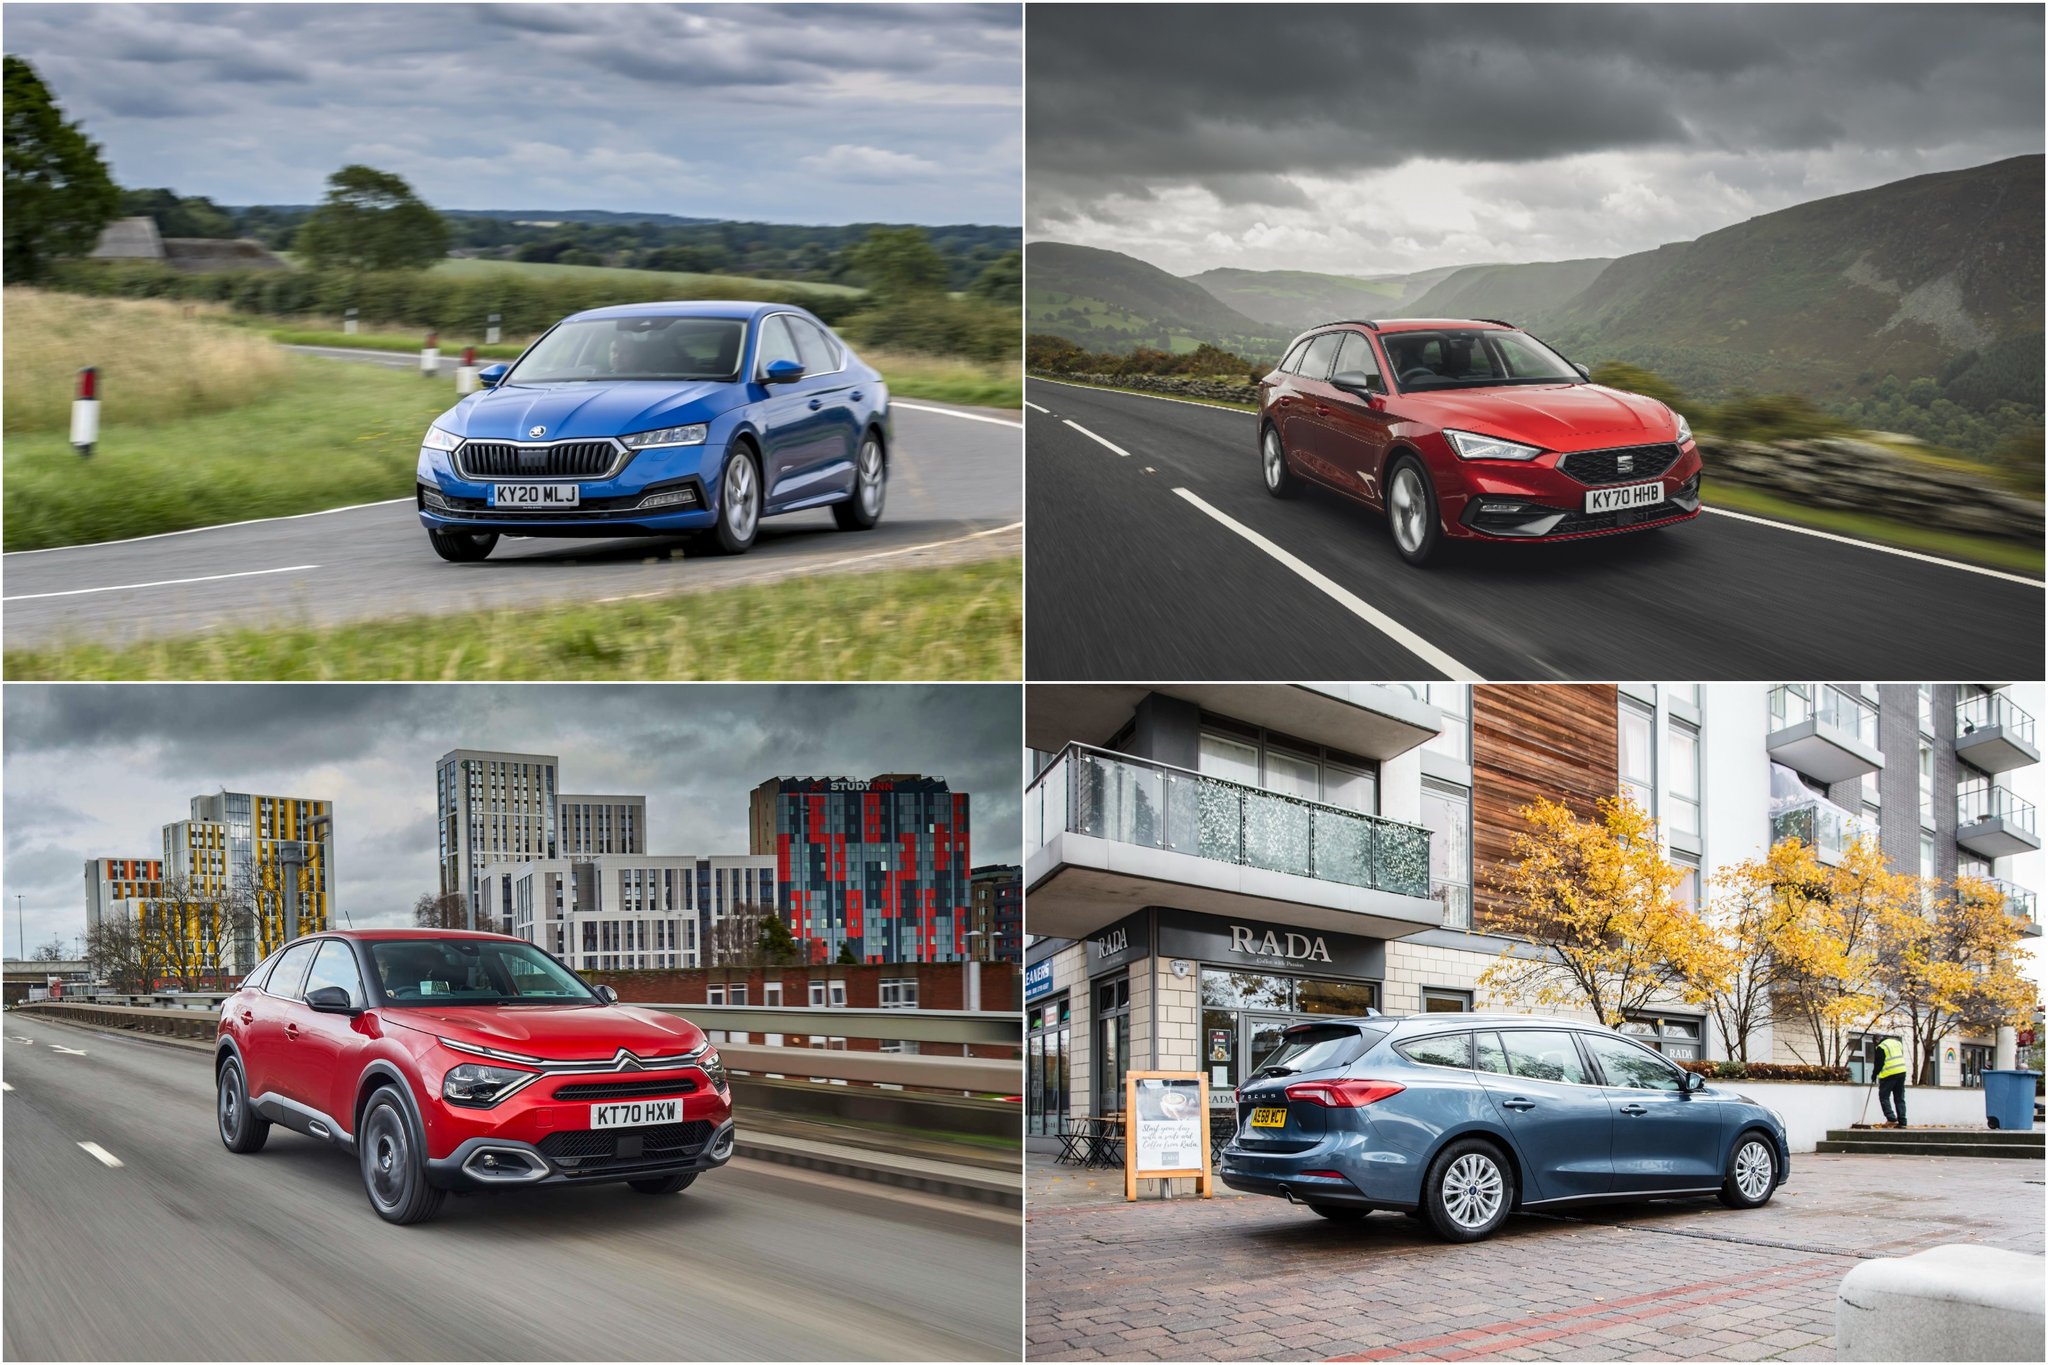 The Most Fuel Efficient Cars On Sale In 21 The 10 New Models With The Best Fuel Economy Verticallobby Com